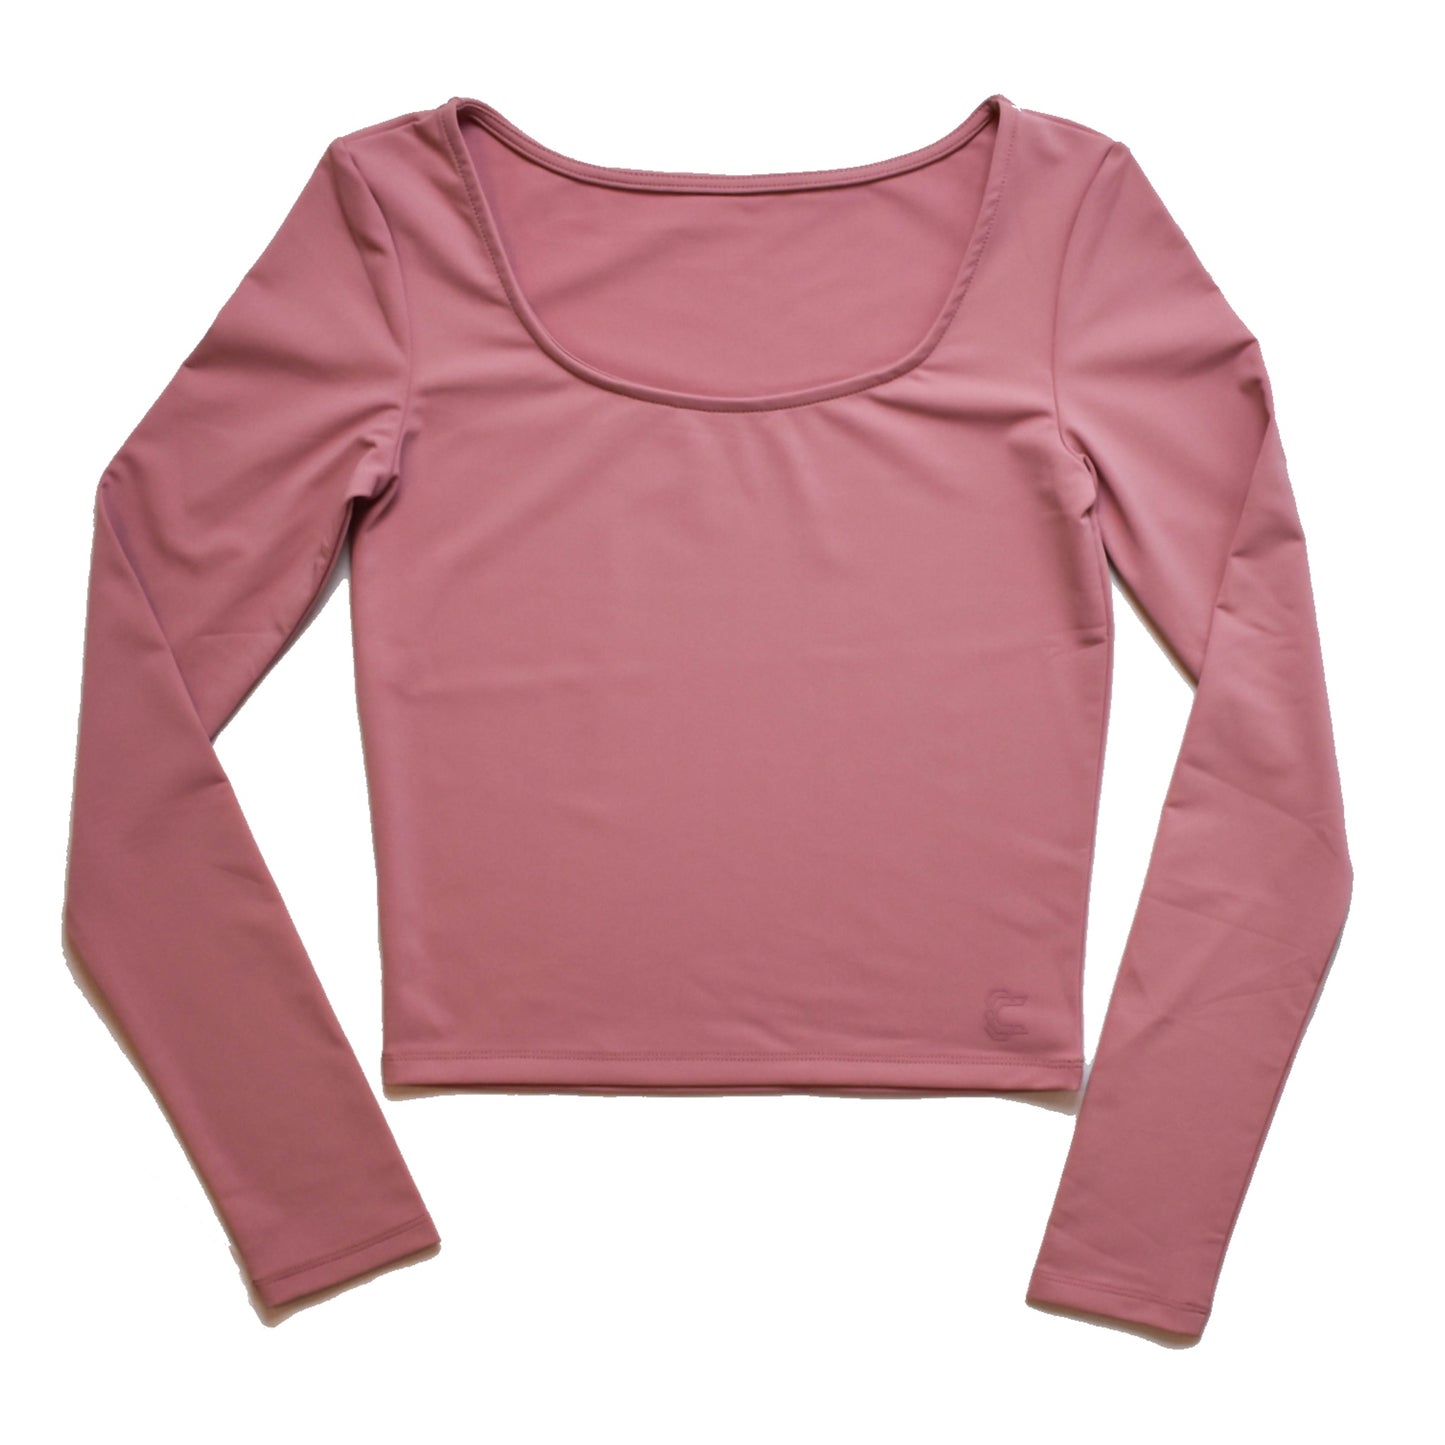 Rosa Rose Reversible High Neck and Scoop Neck UPF 50+ Women's Long Sleeve Versatile Sun Protective Top